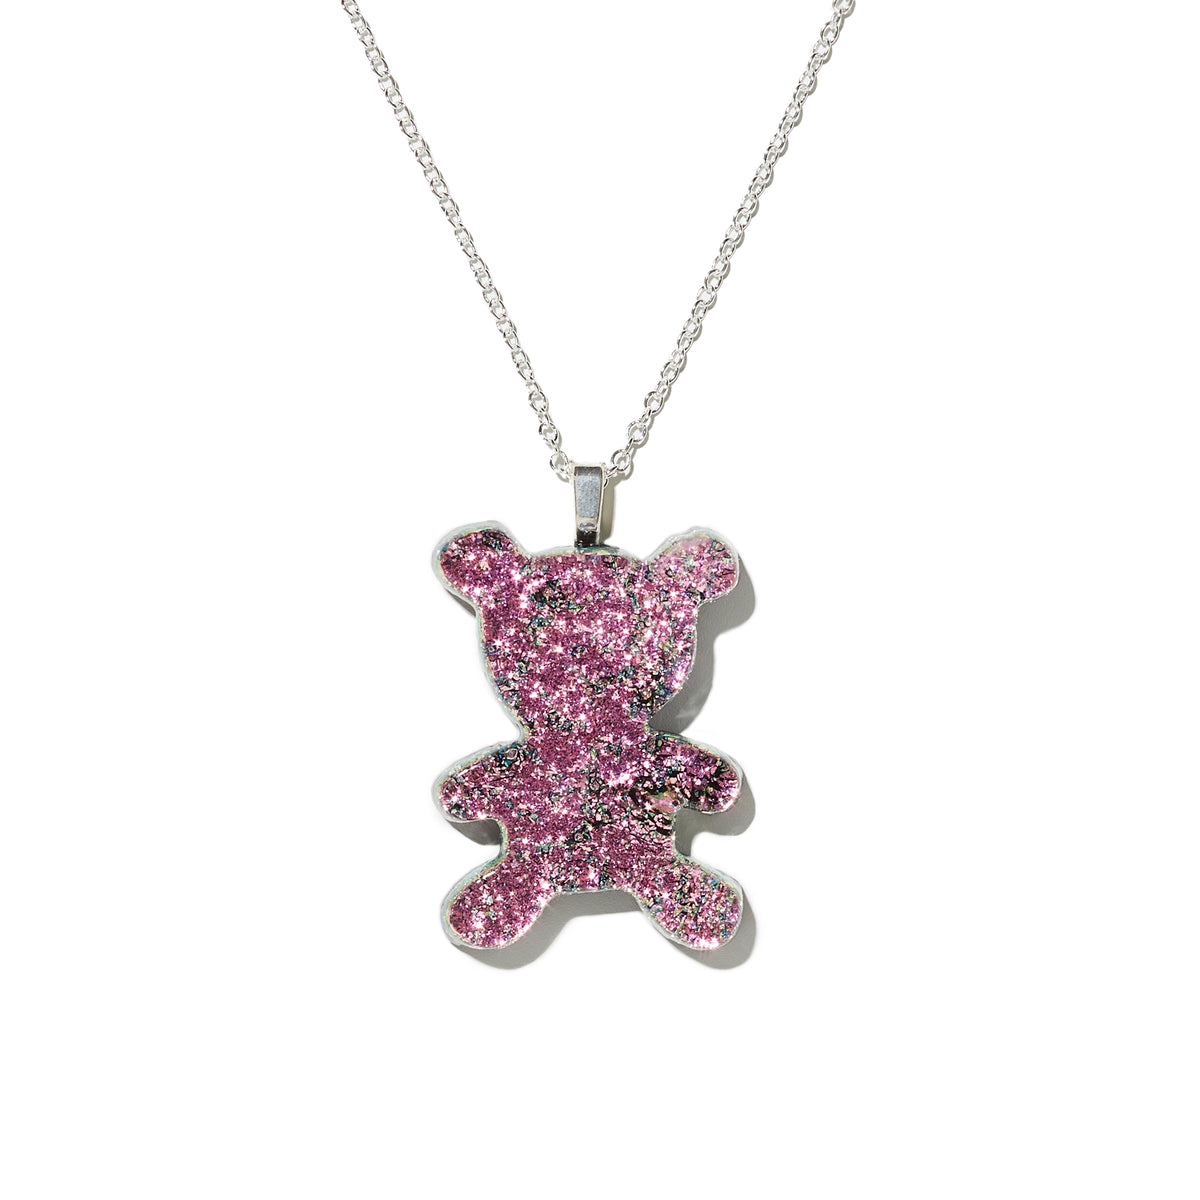 Dichroic Teddy Bear Necklace | Fused Iridescent Glass Jewelry